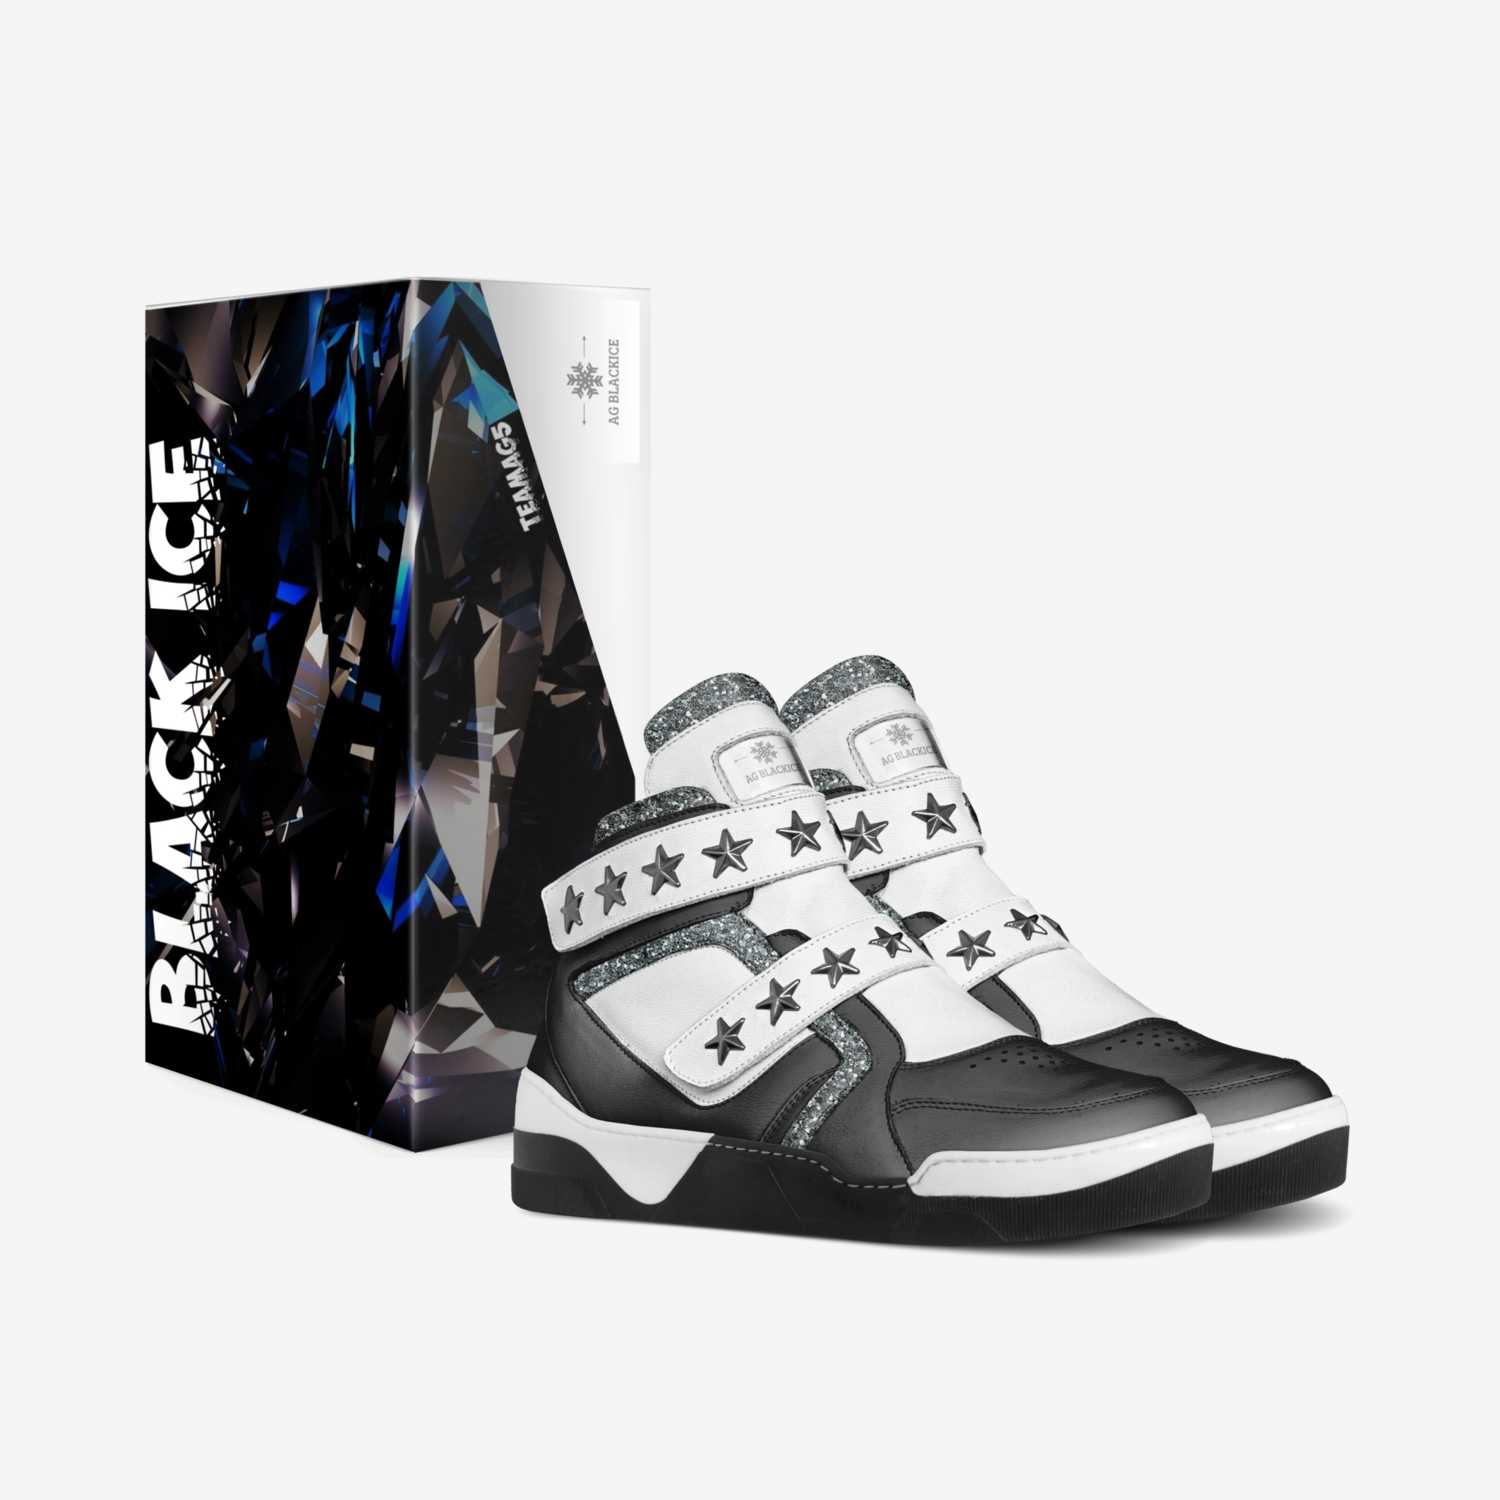 AG BlackIce custom made in Italy shoes by Daniel Brown | Box view